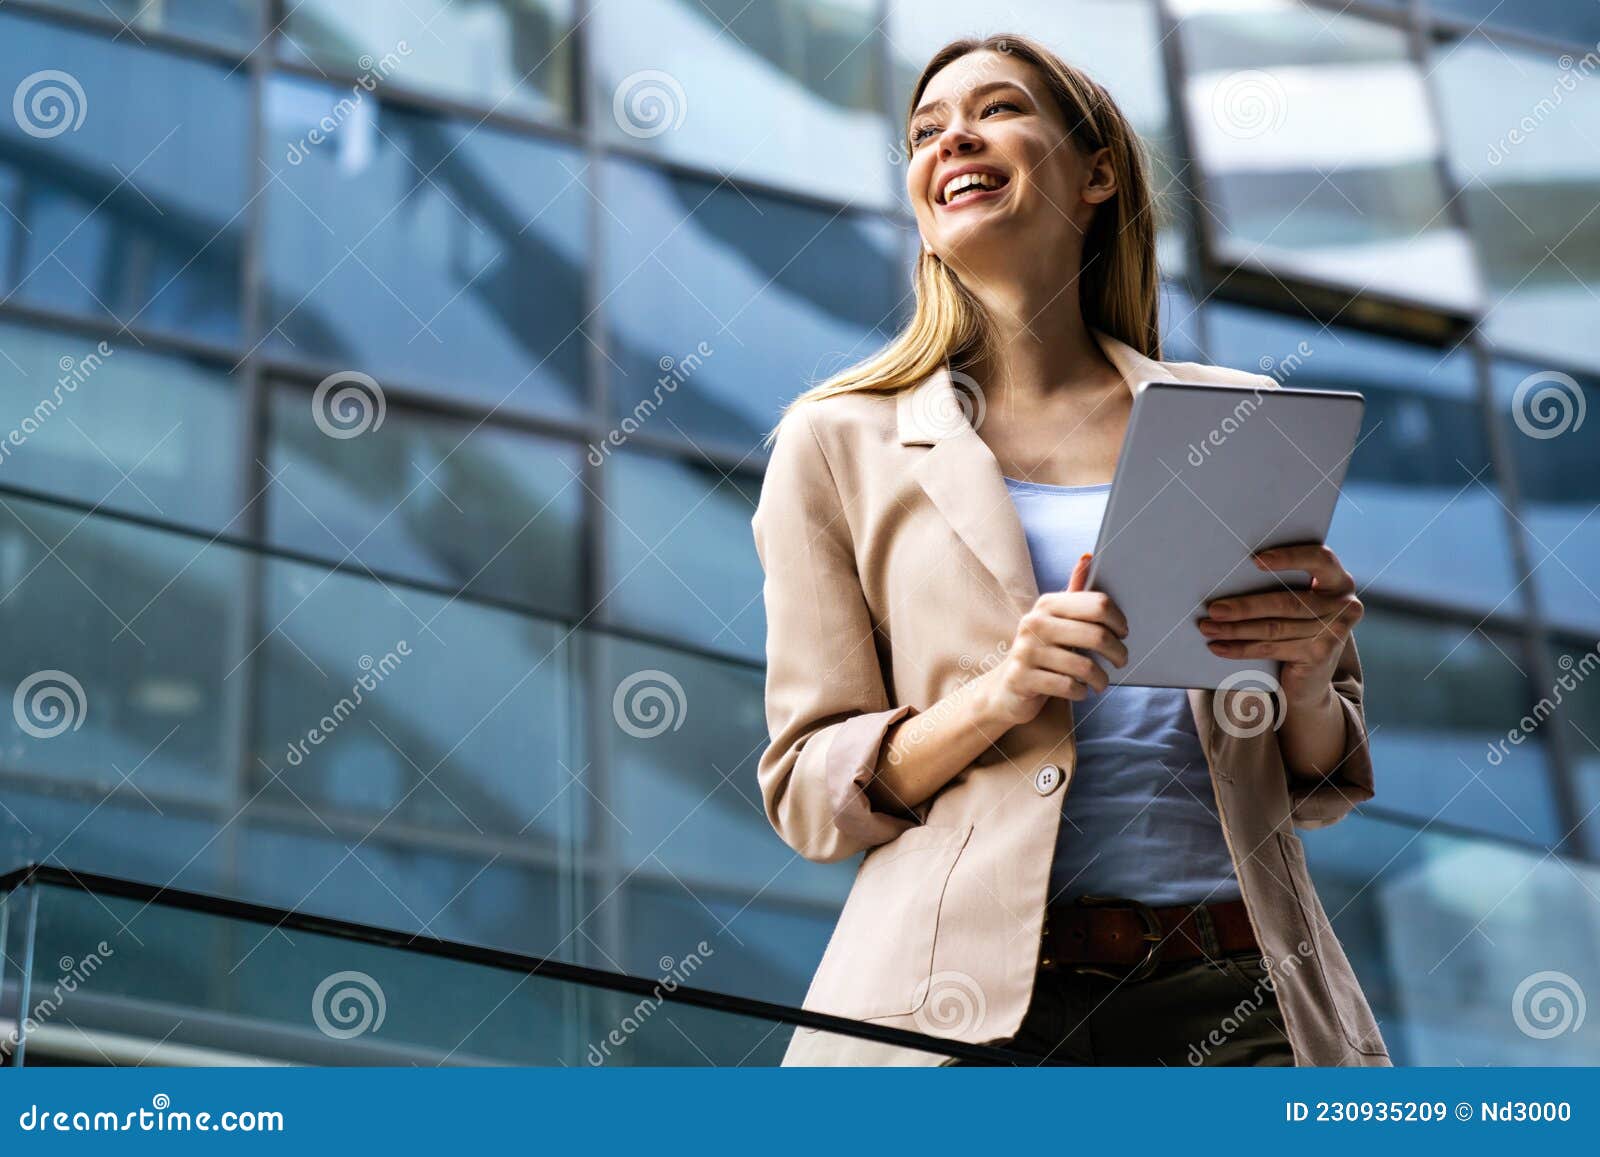 portrait of a successful business woman using digital tablet in front of modern business building